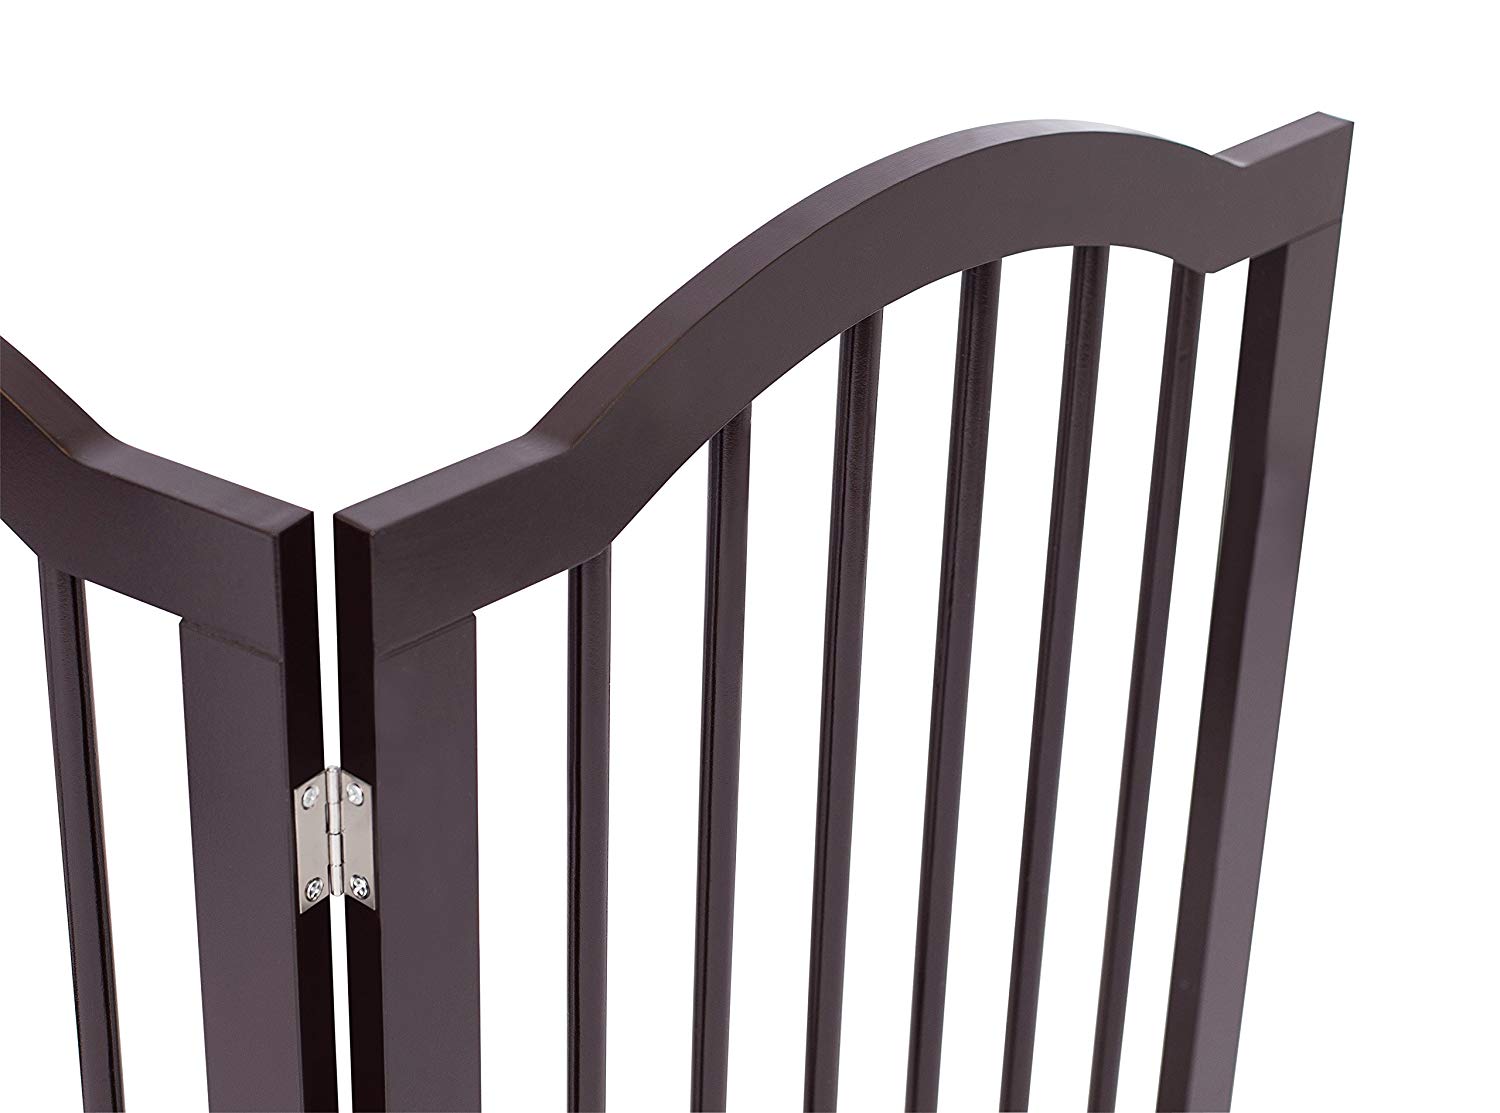 Internet's Best Pet Gate with Arched Top - 3 Panel - 24" Tall - Espresso - image 2 of 8